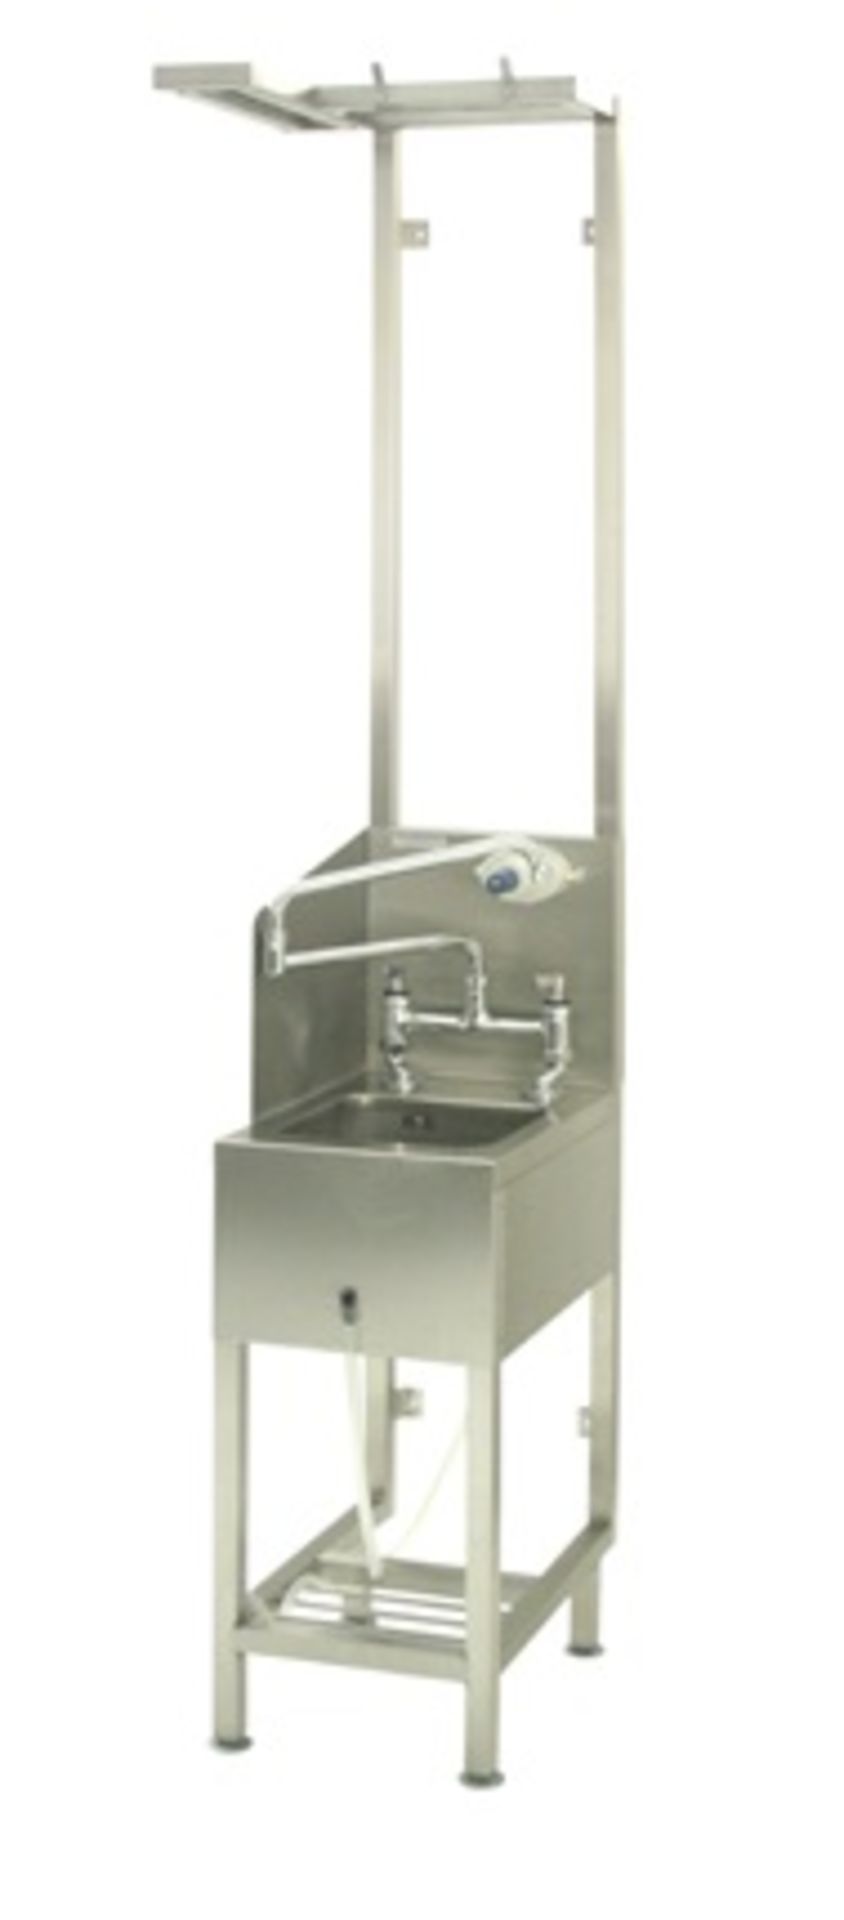 1 x Slim Janitorial Wash Station - Features Wash Bowl, Mop Hanger, Goggle Hook, Detergent Pump & Tap